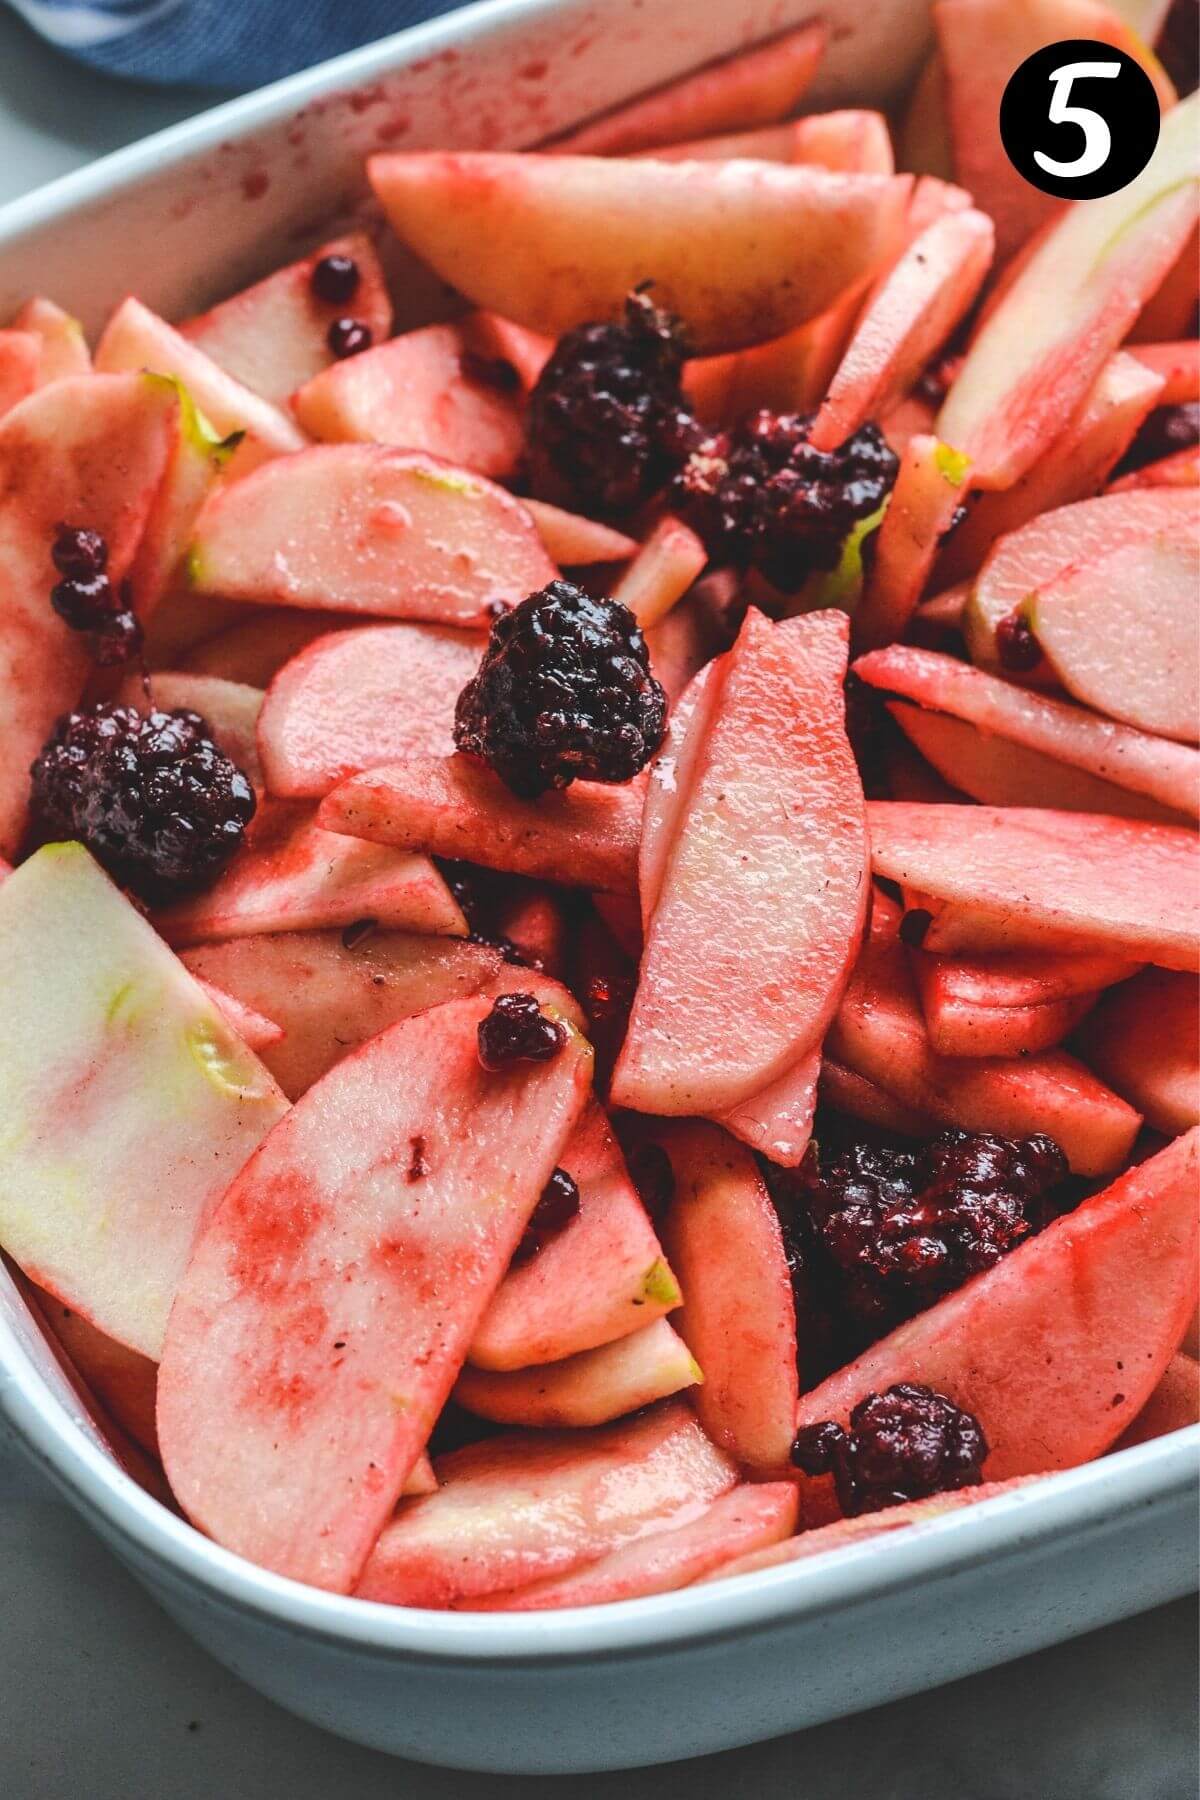 blackberries and sliced apples in a white baking dish